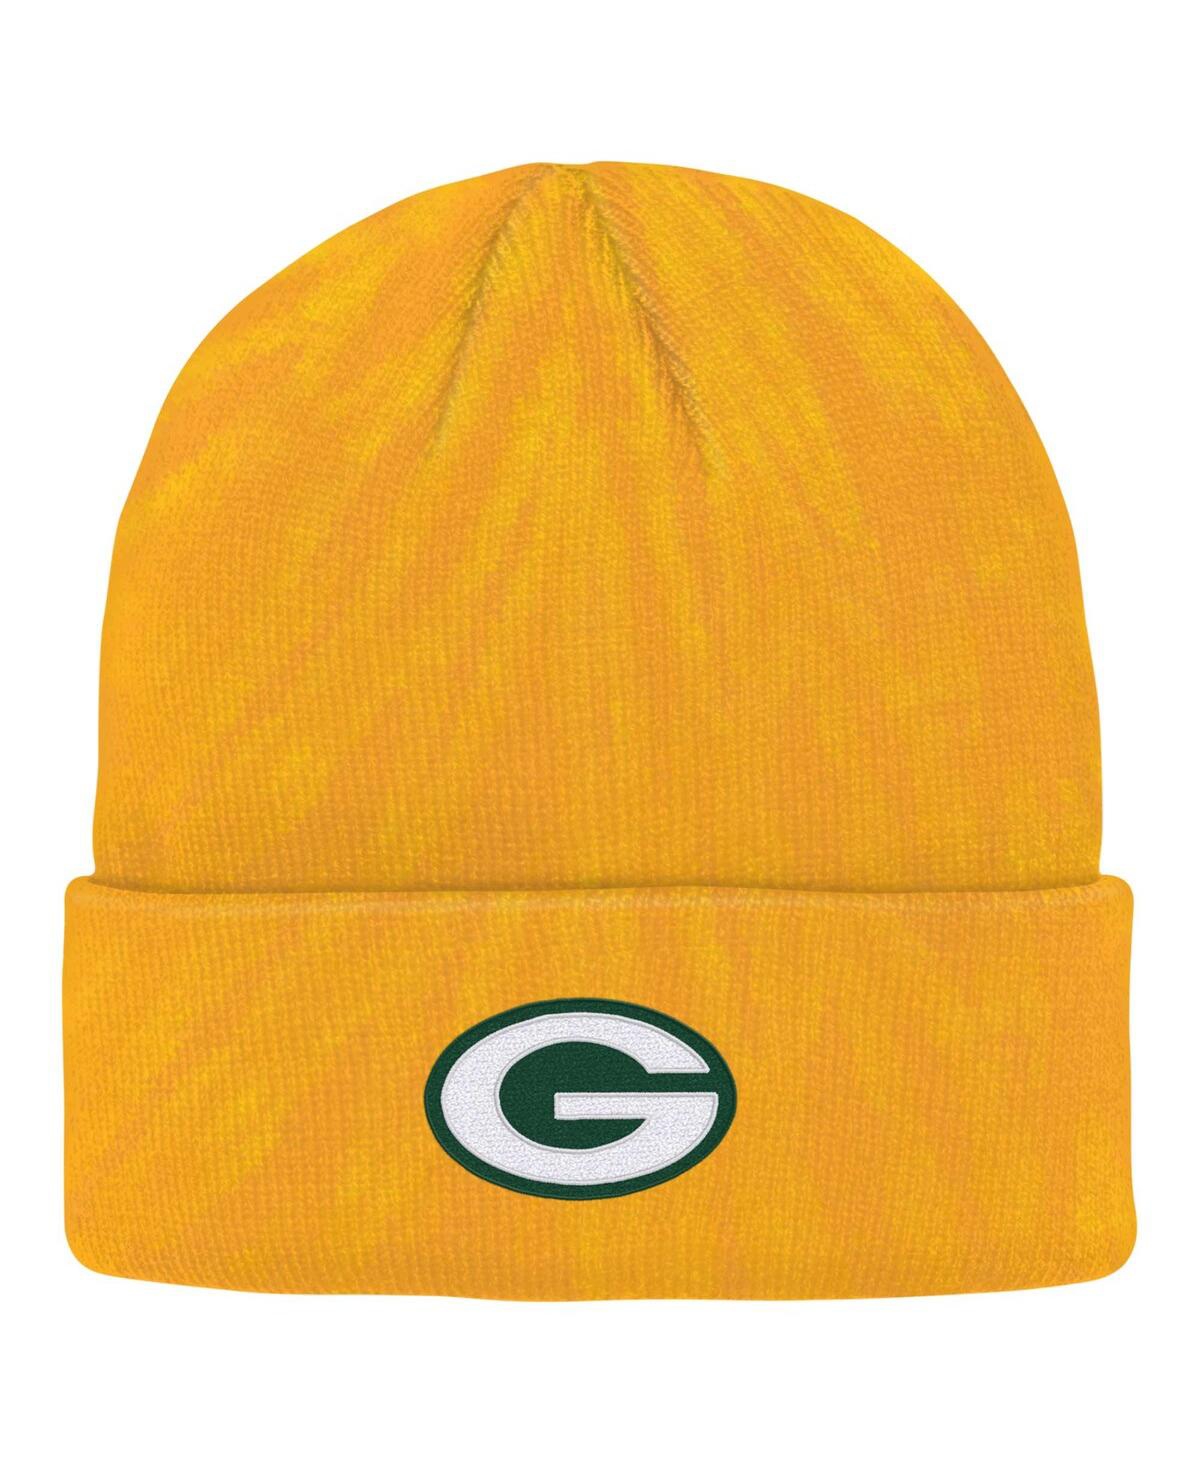 Outerstuff Kids' Big Boys And Girls Gold Green Bay Packers Tie-dye Cuffed Knit Hat In Yellow